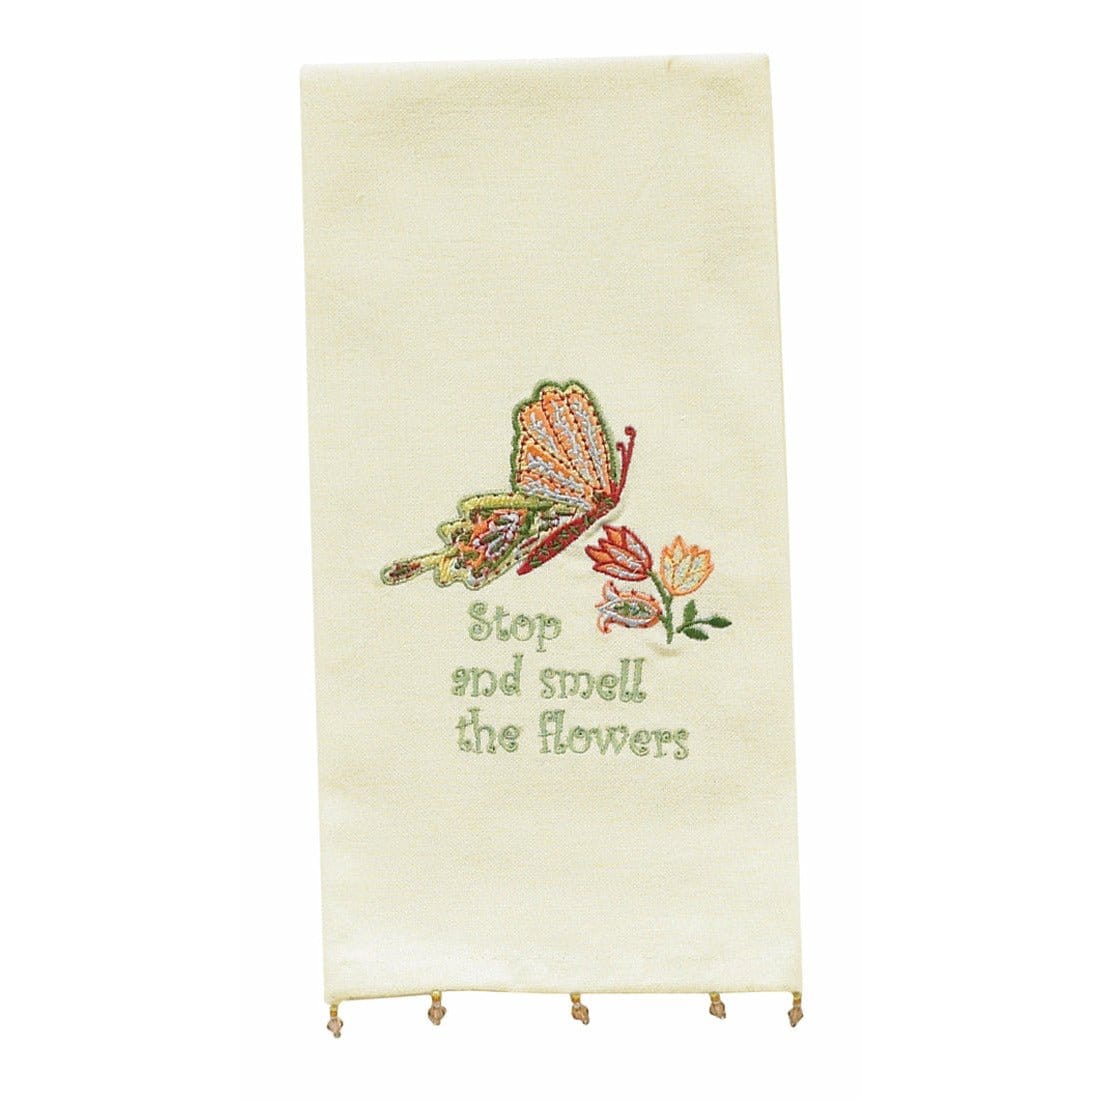 Stop And Smell The Flowers Guest Towel-Park Designs-The Village Merchant